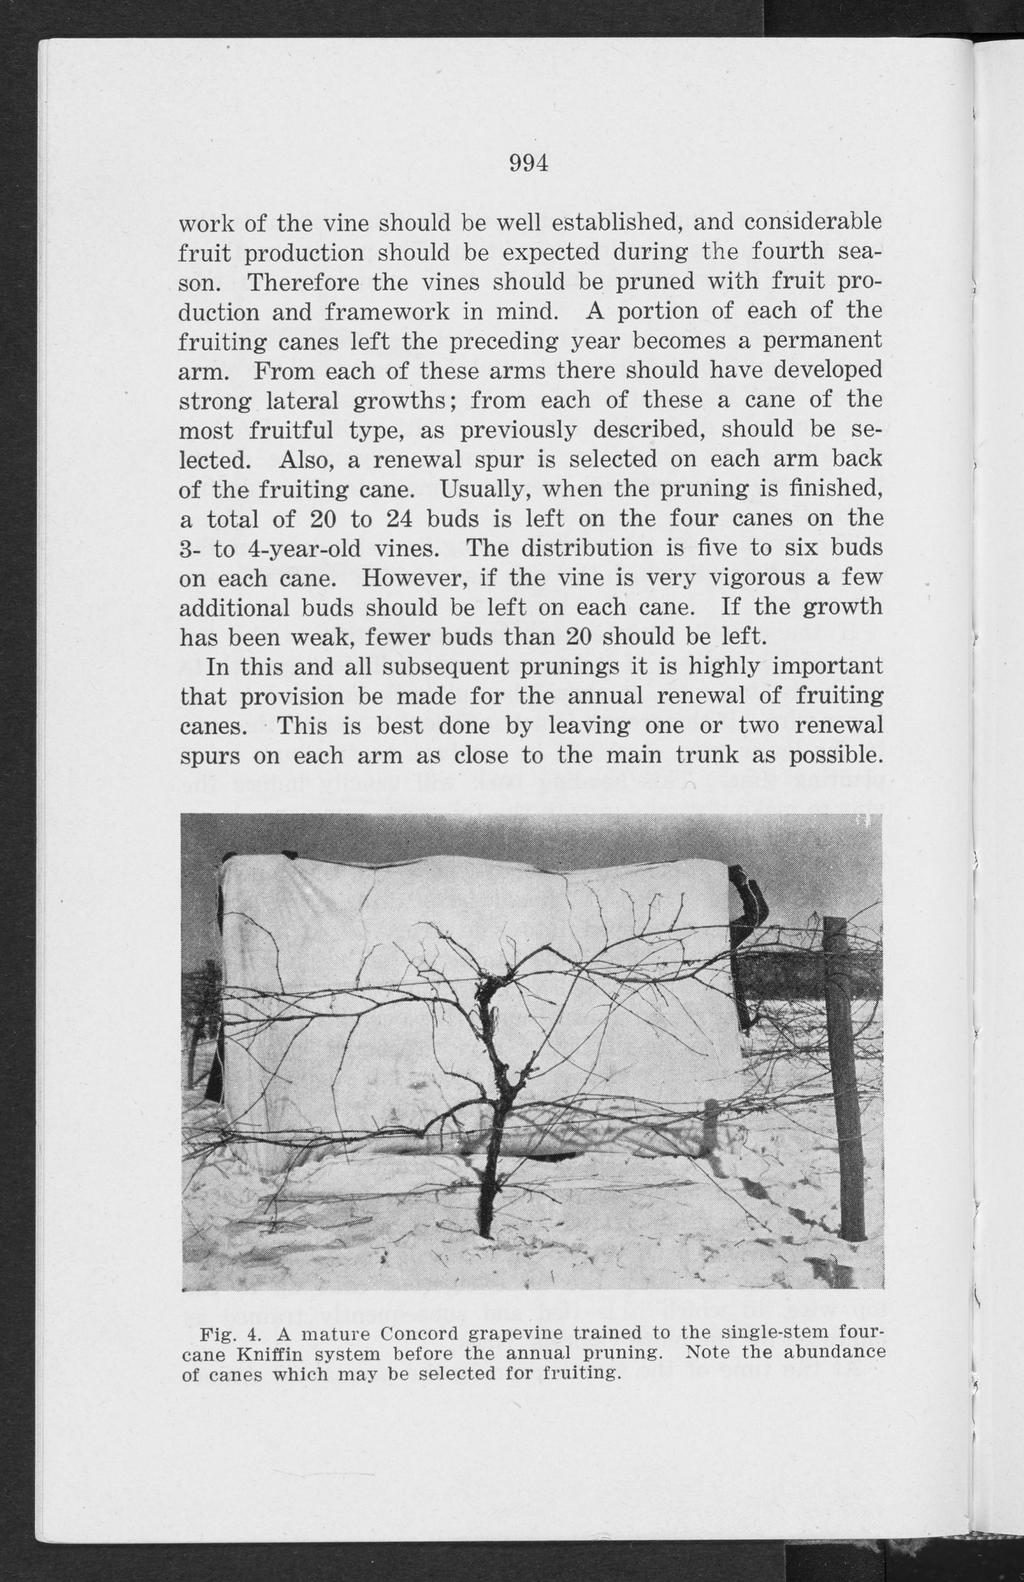 Bulletin P, Vol. 4, No. 90 [1948], Art. 1 994 work of the vine should be well established, and considerable fruit production should be expected during the fourth season.